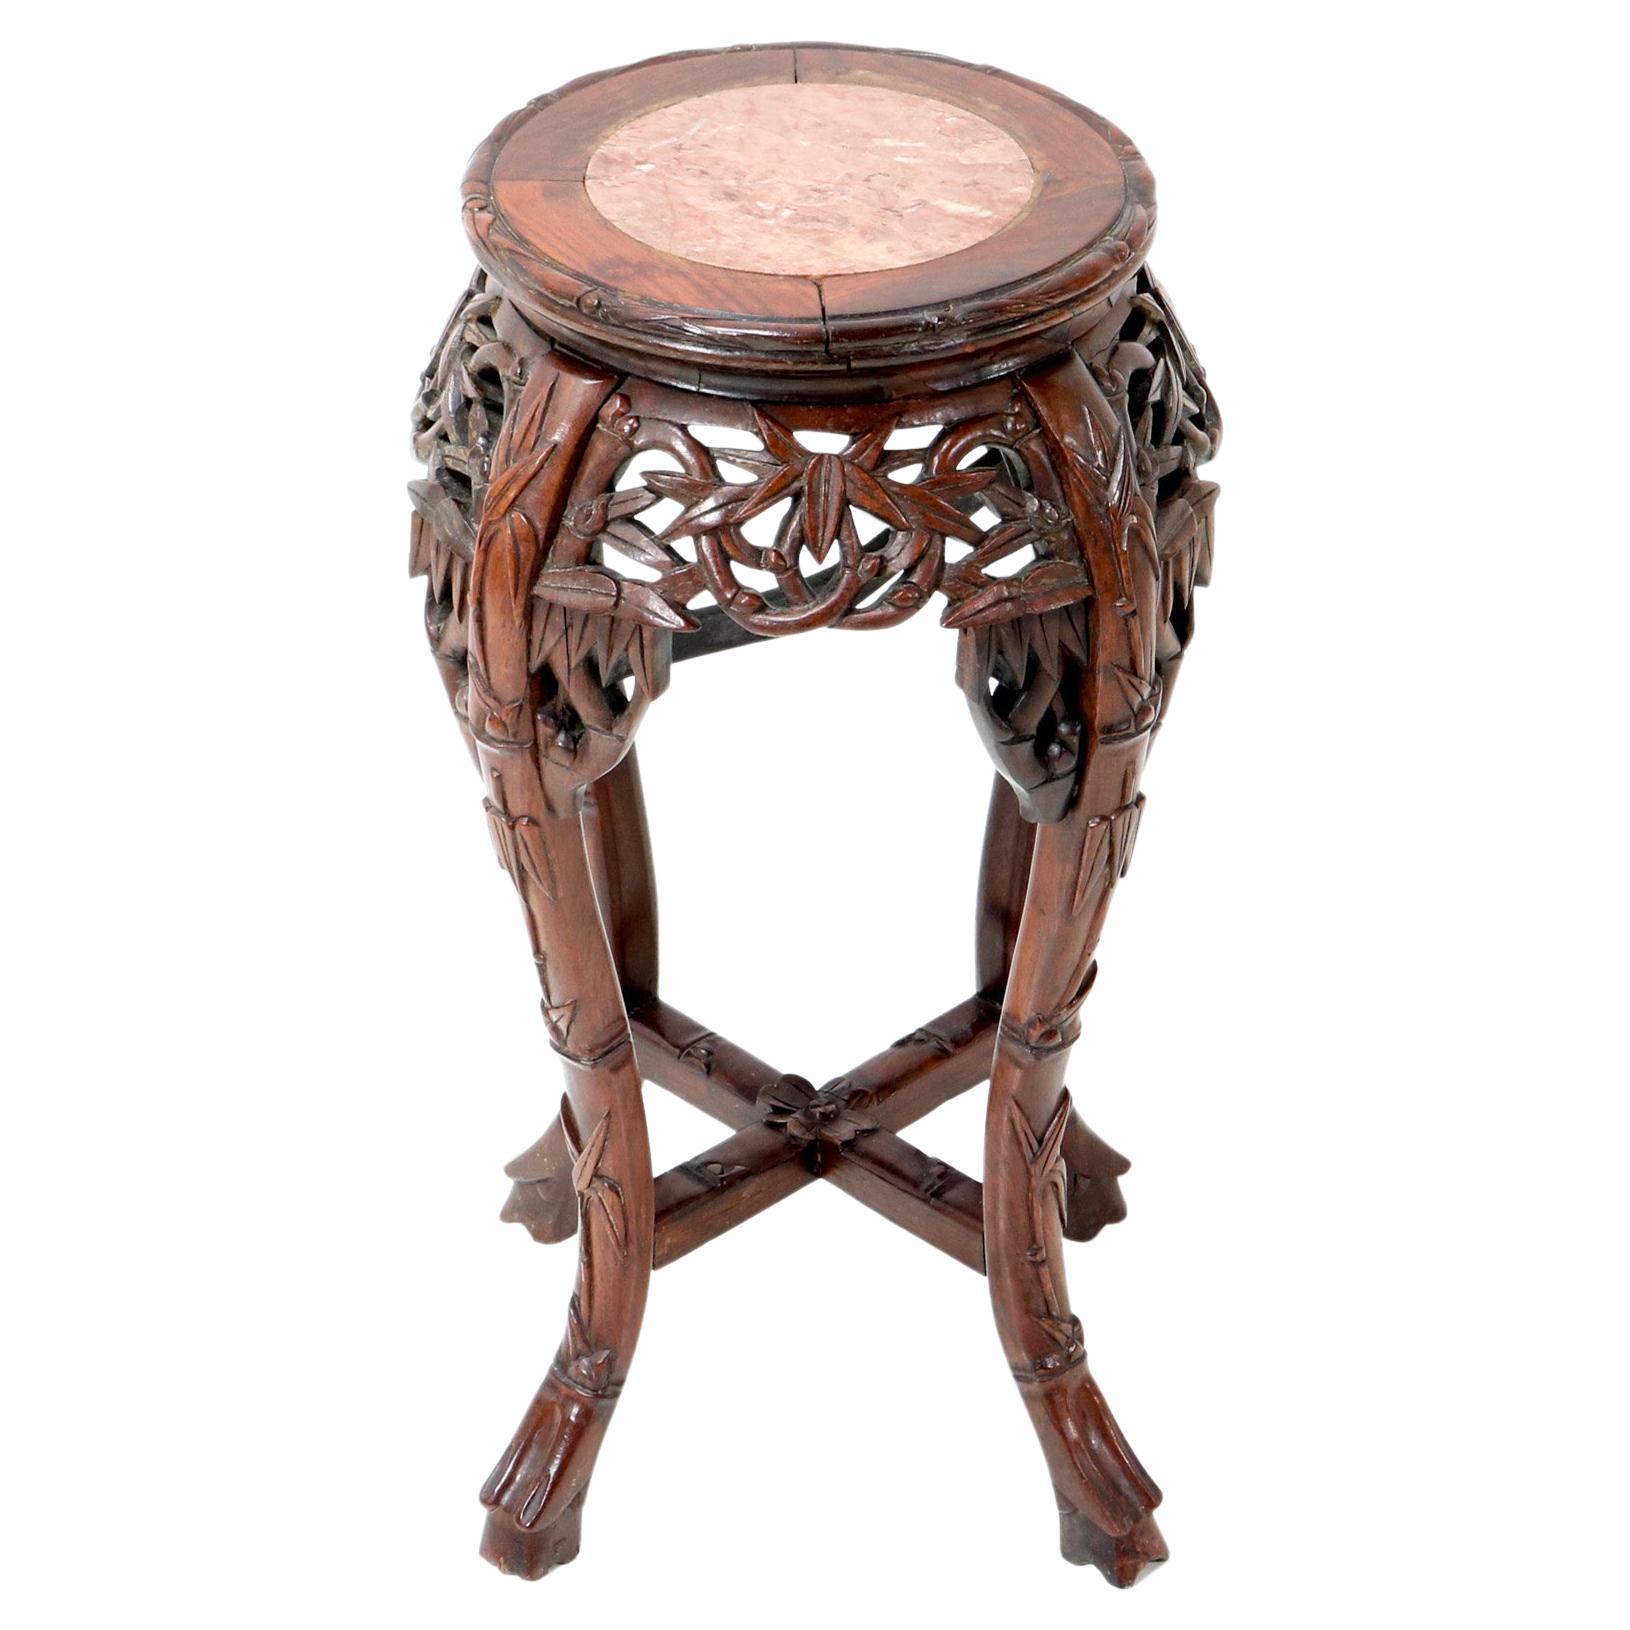 Chinese Hardwood Carved Pedestal Table with Marble Inlaid Top, 1920s For Sale